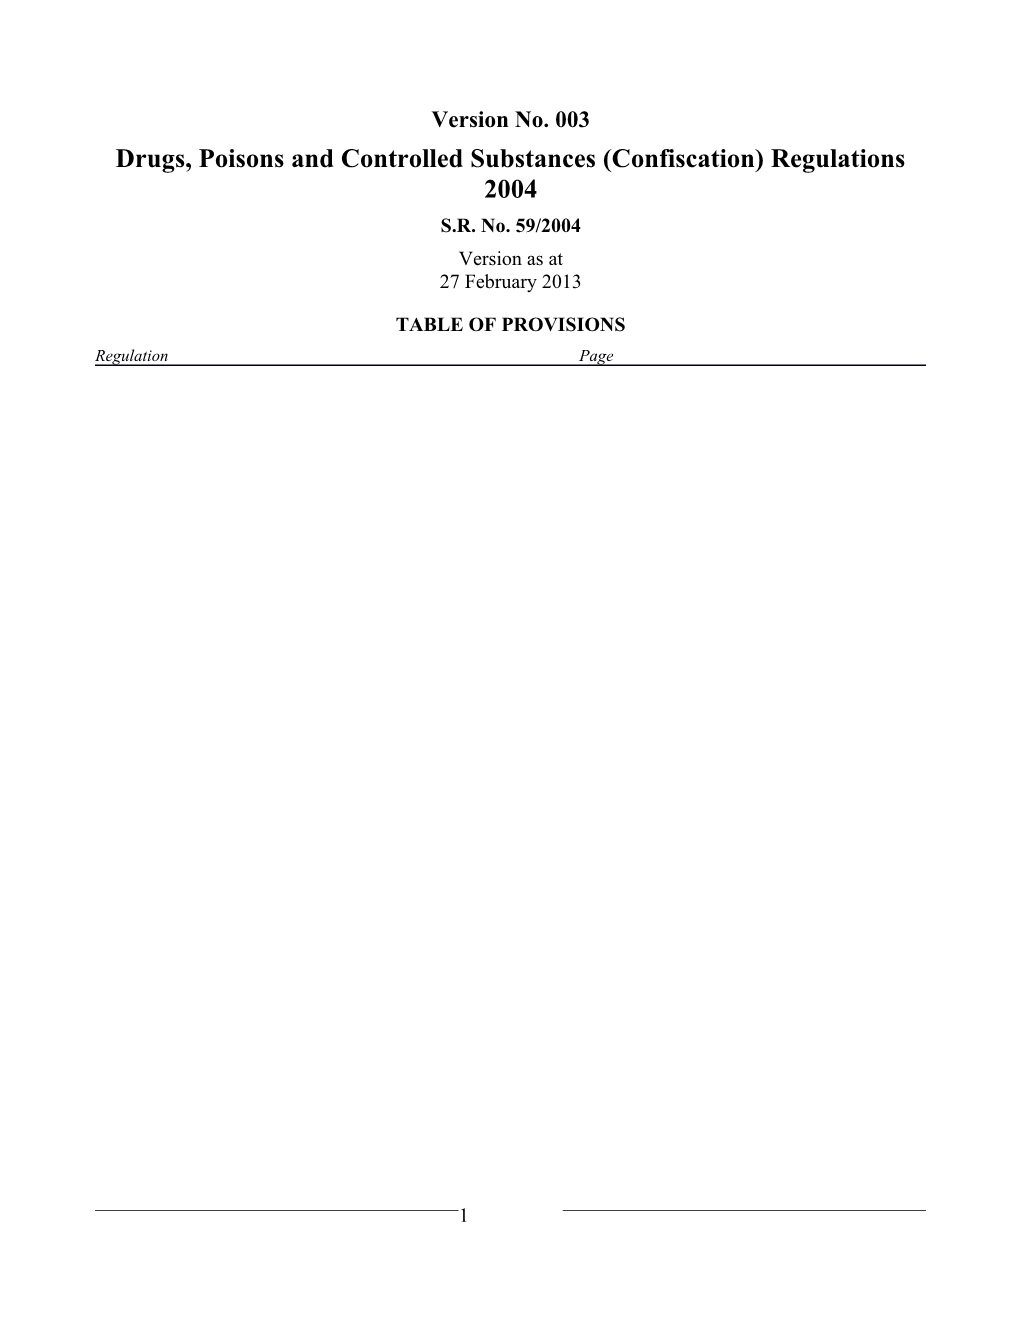 Drugs, Poisons and Controlled Substances (Confiscation) Regulations 2004